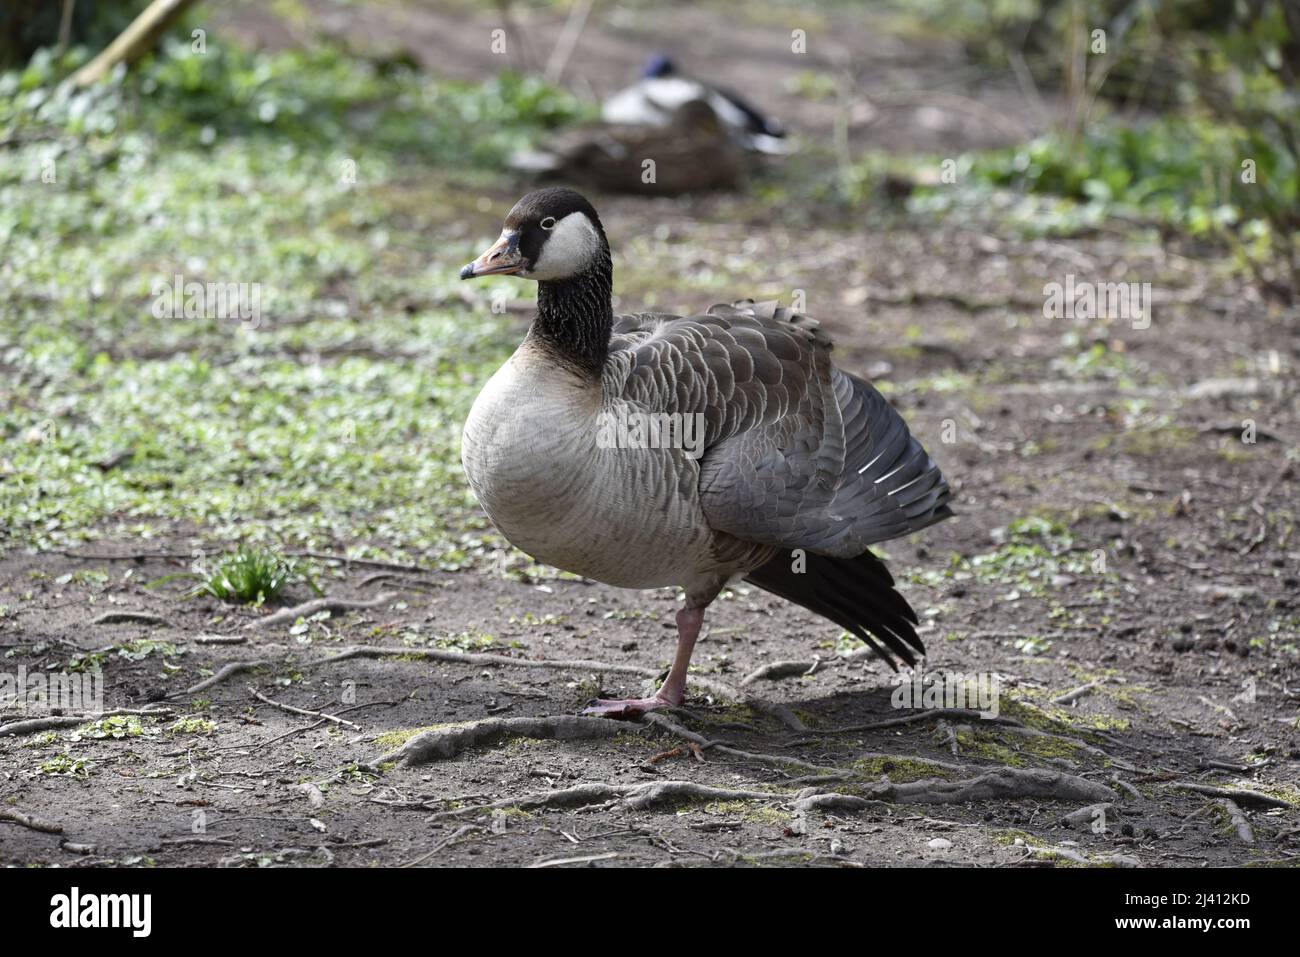 Close-Up, Left-Profile Image of a Greylag Goose (Anser anser) x Canada Goose (Branta canadensis) Hybrid Standing on One Leg in the Sun in the UK Stock Photo